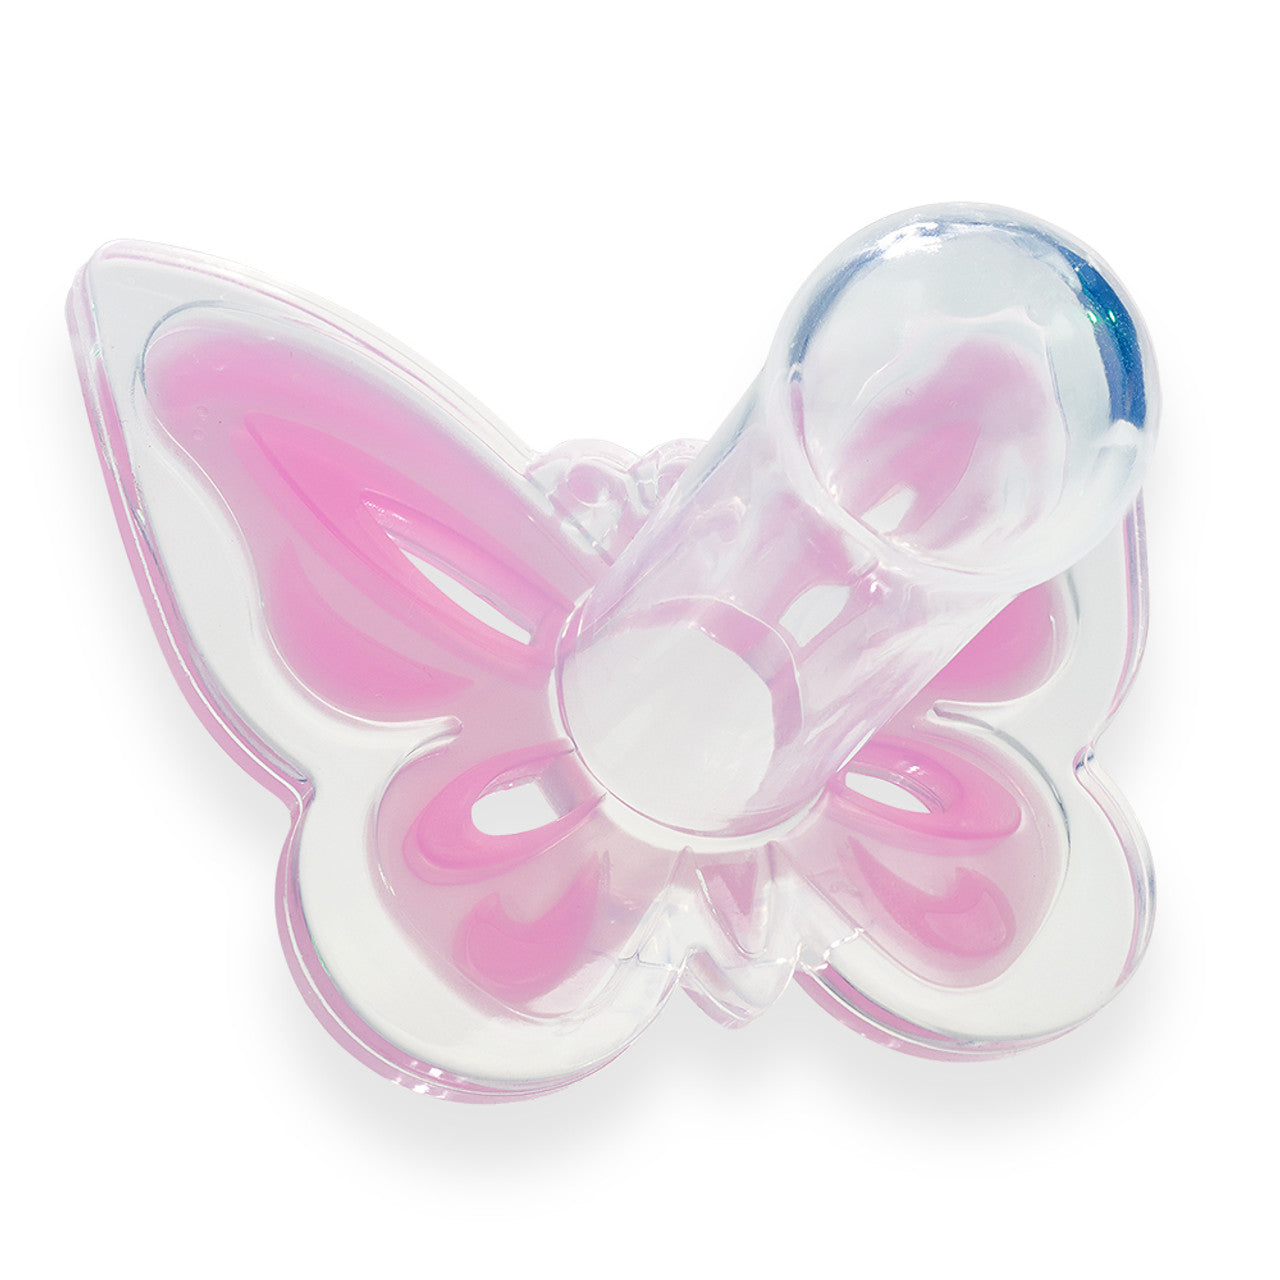 Enigma - Fully Silicone Butterfly Adult Pacifier Novelty